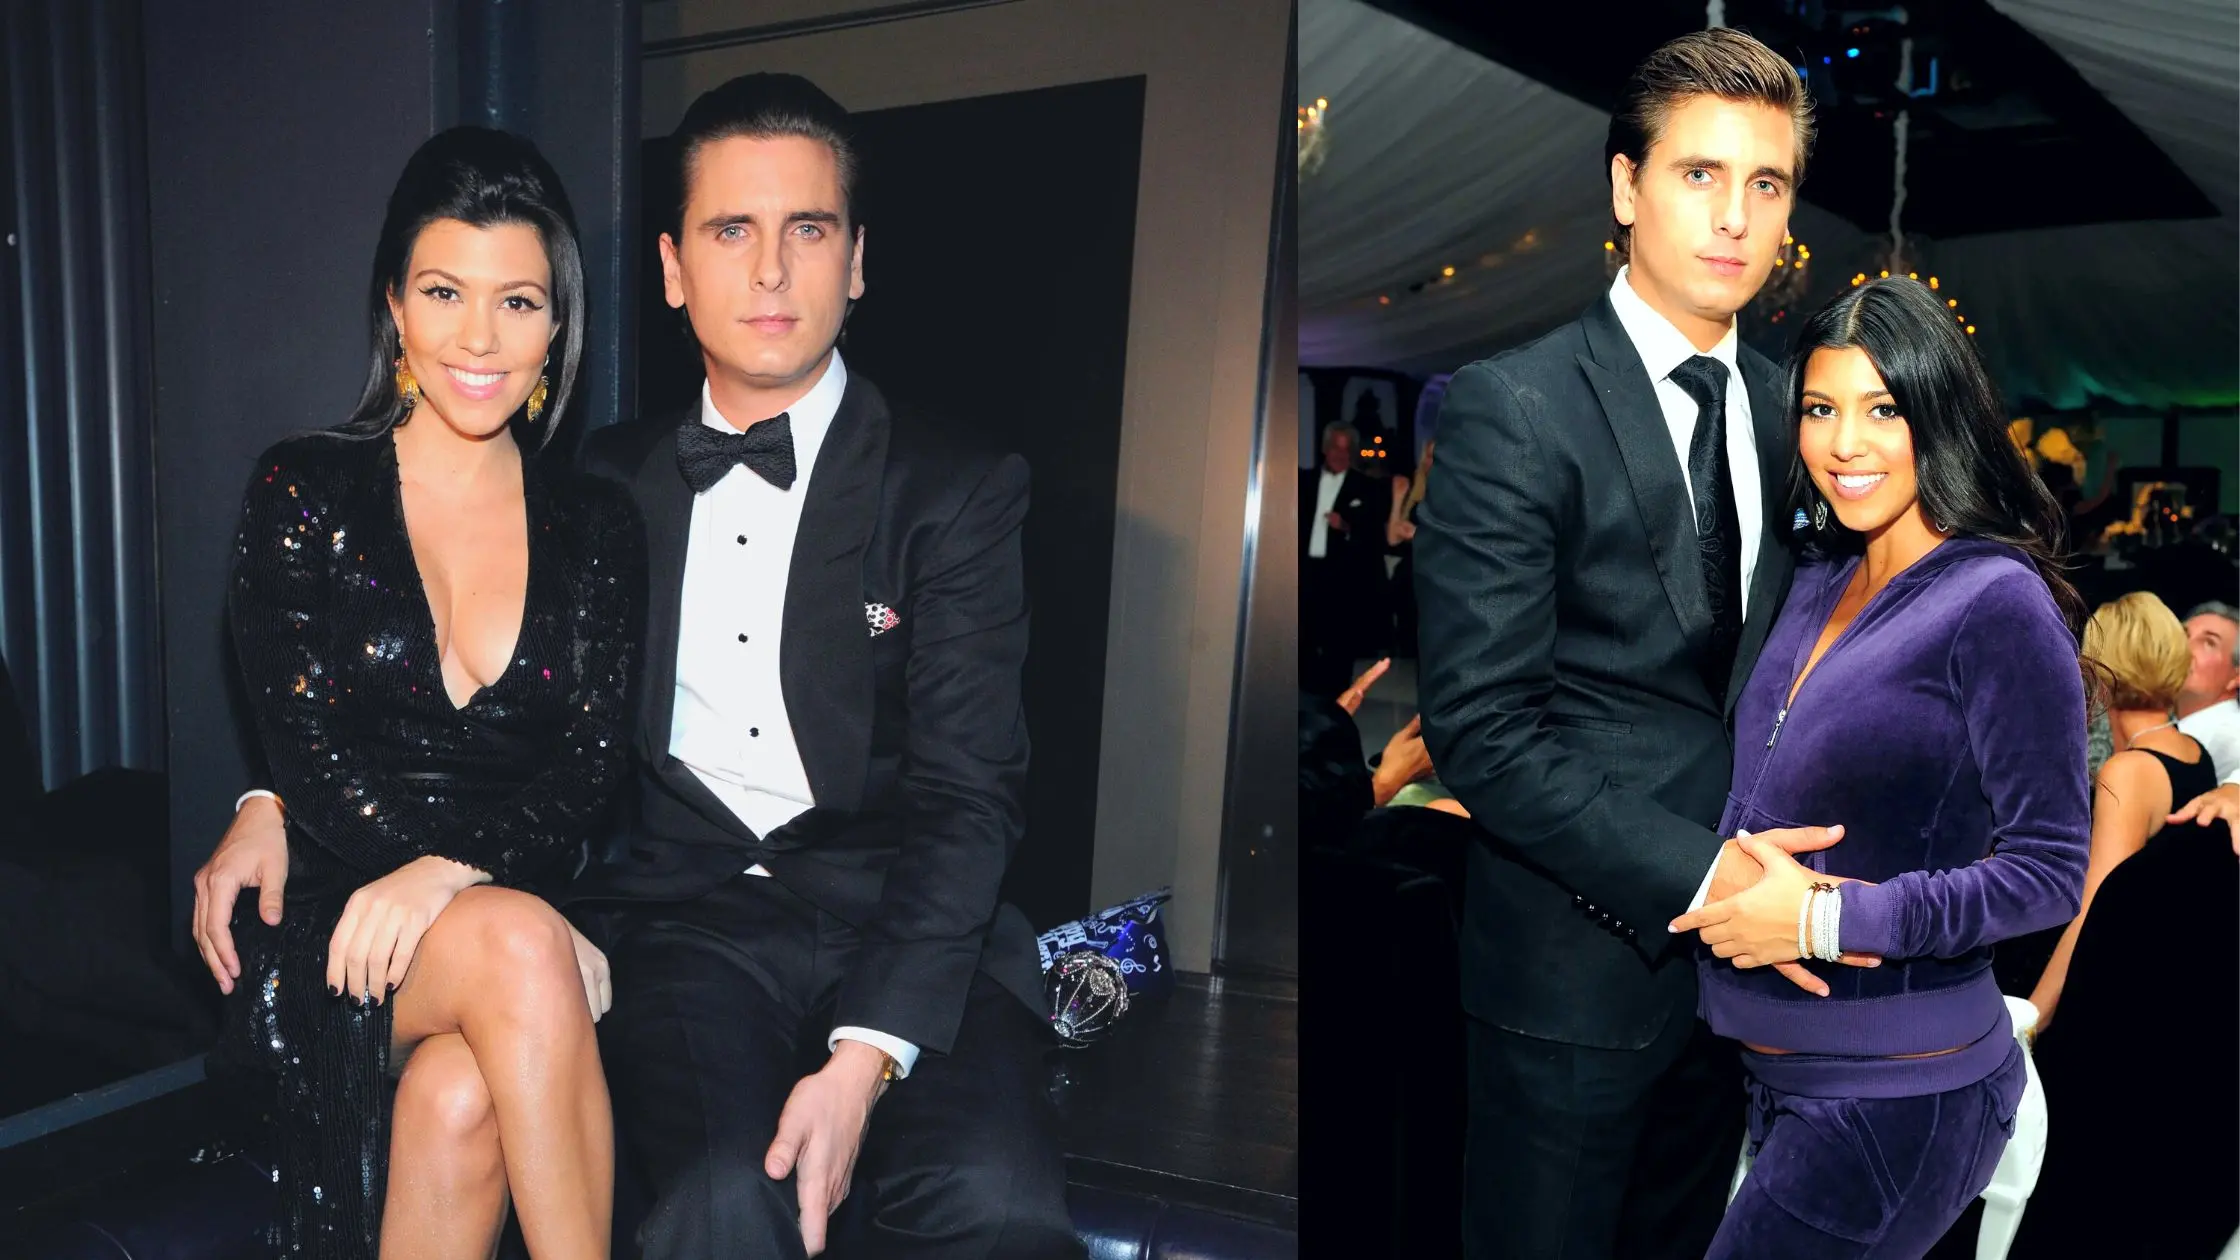 Scott Disick’s Appearance In Keeping Up With The Kardashians